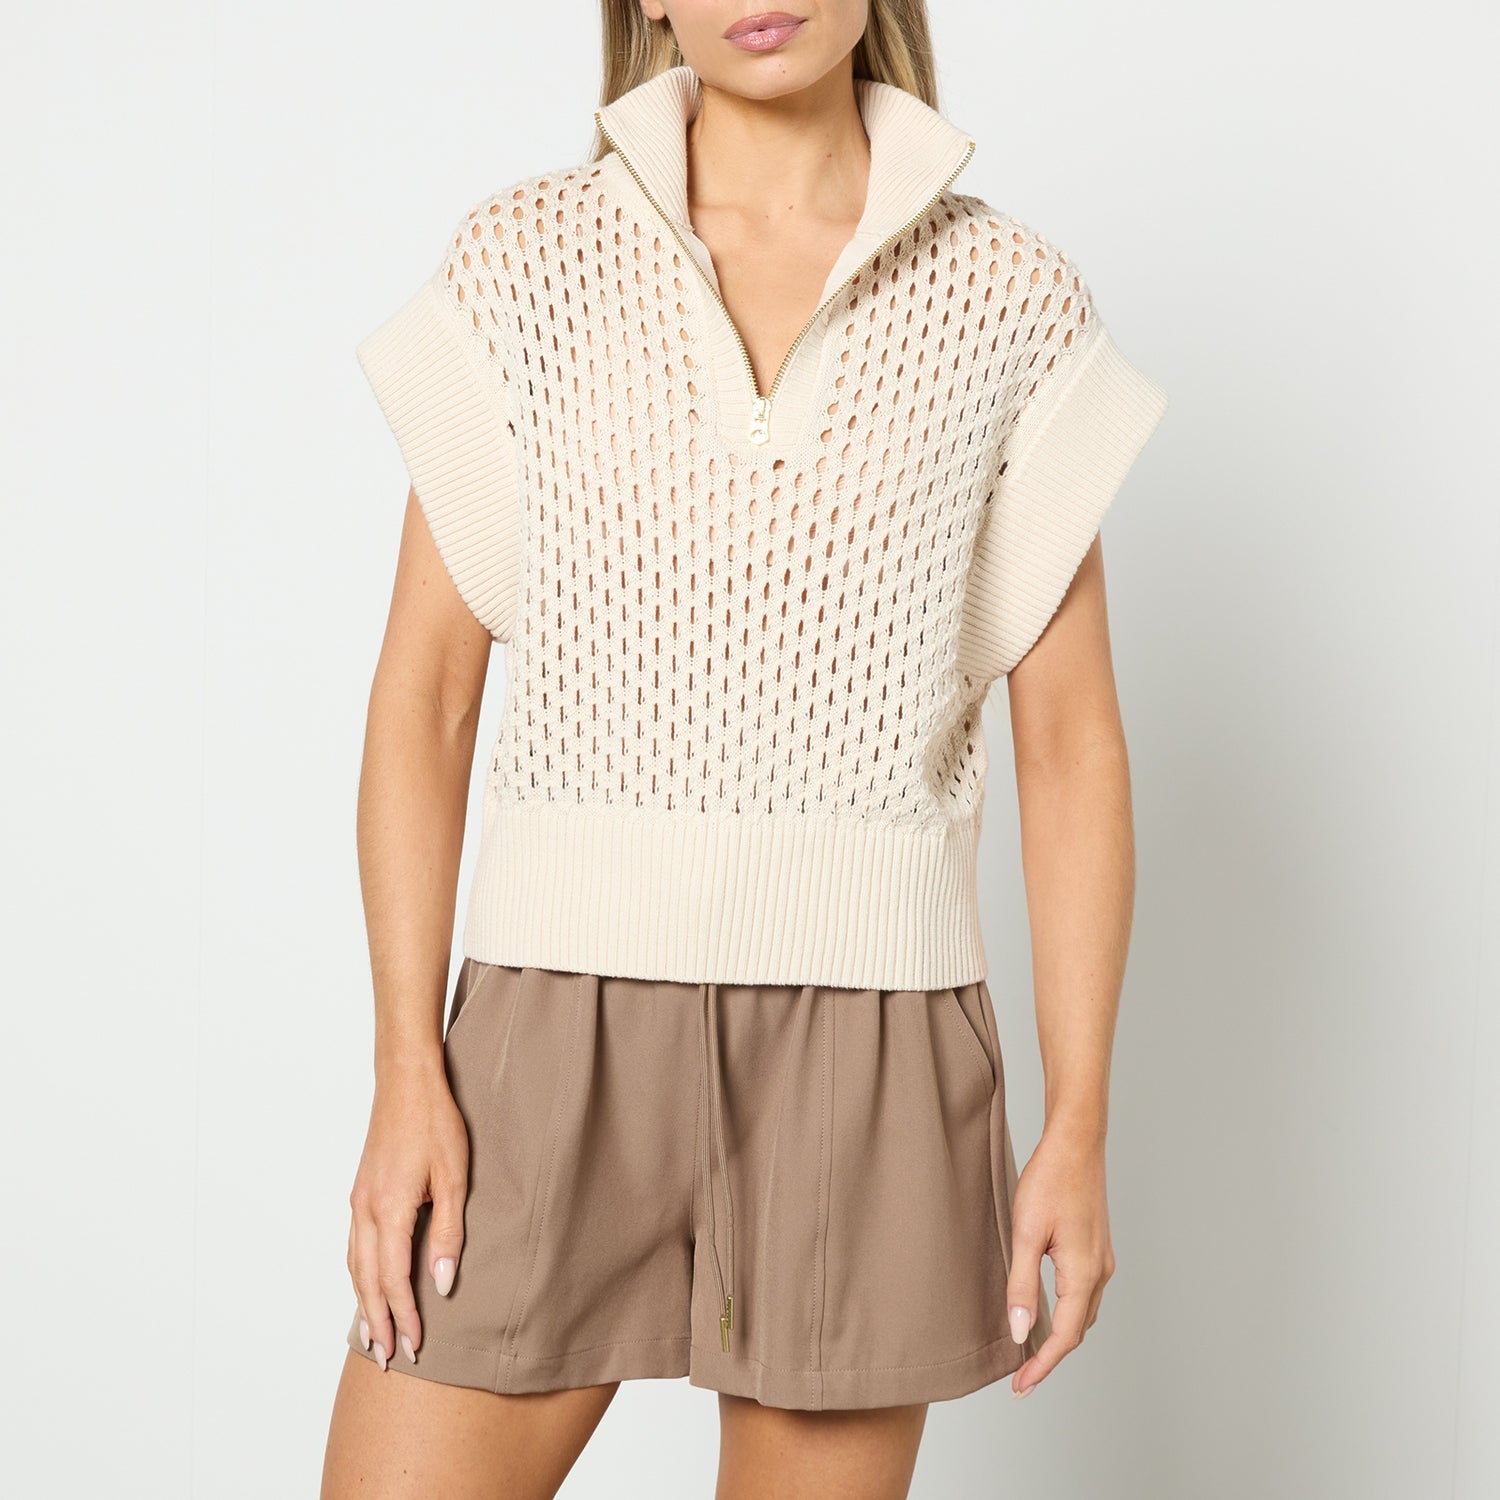 Varley Gaines Cotton Open-Knit Top - L